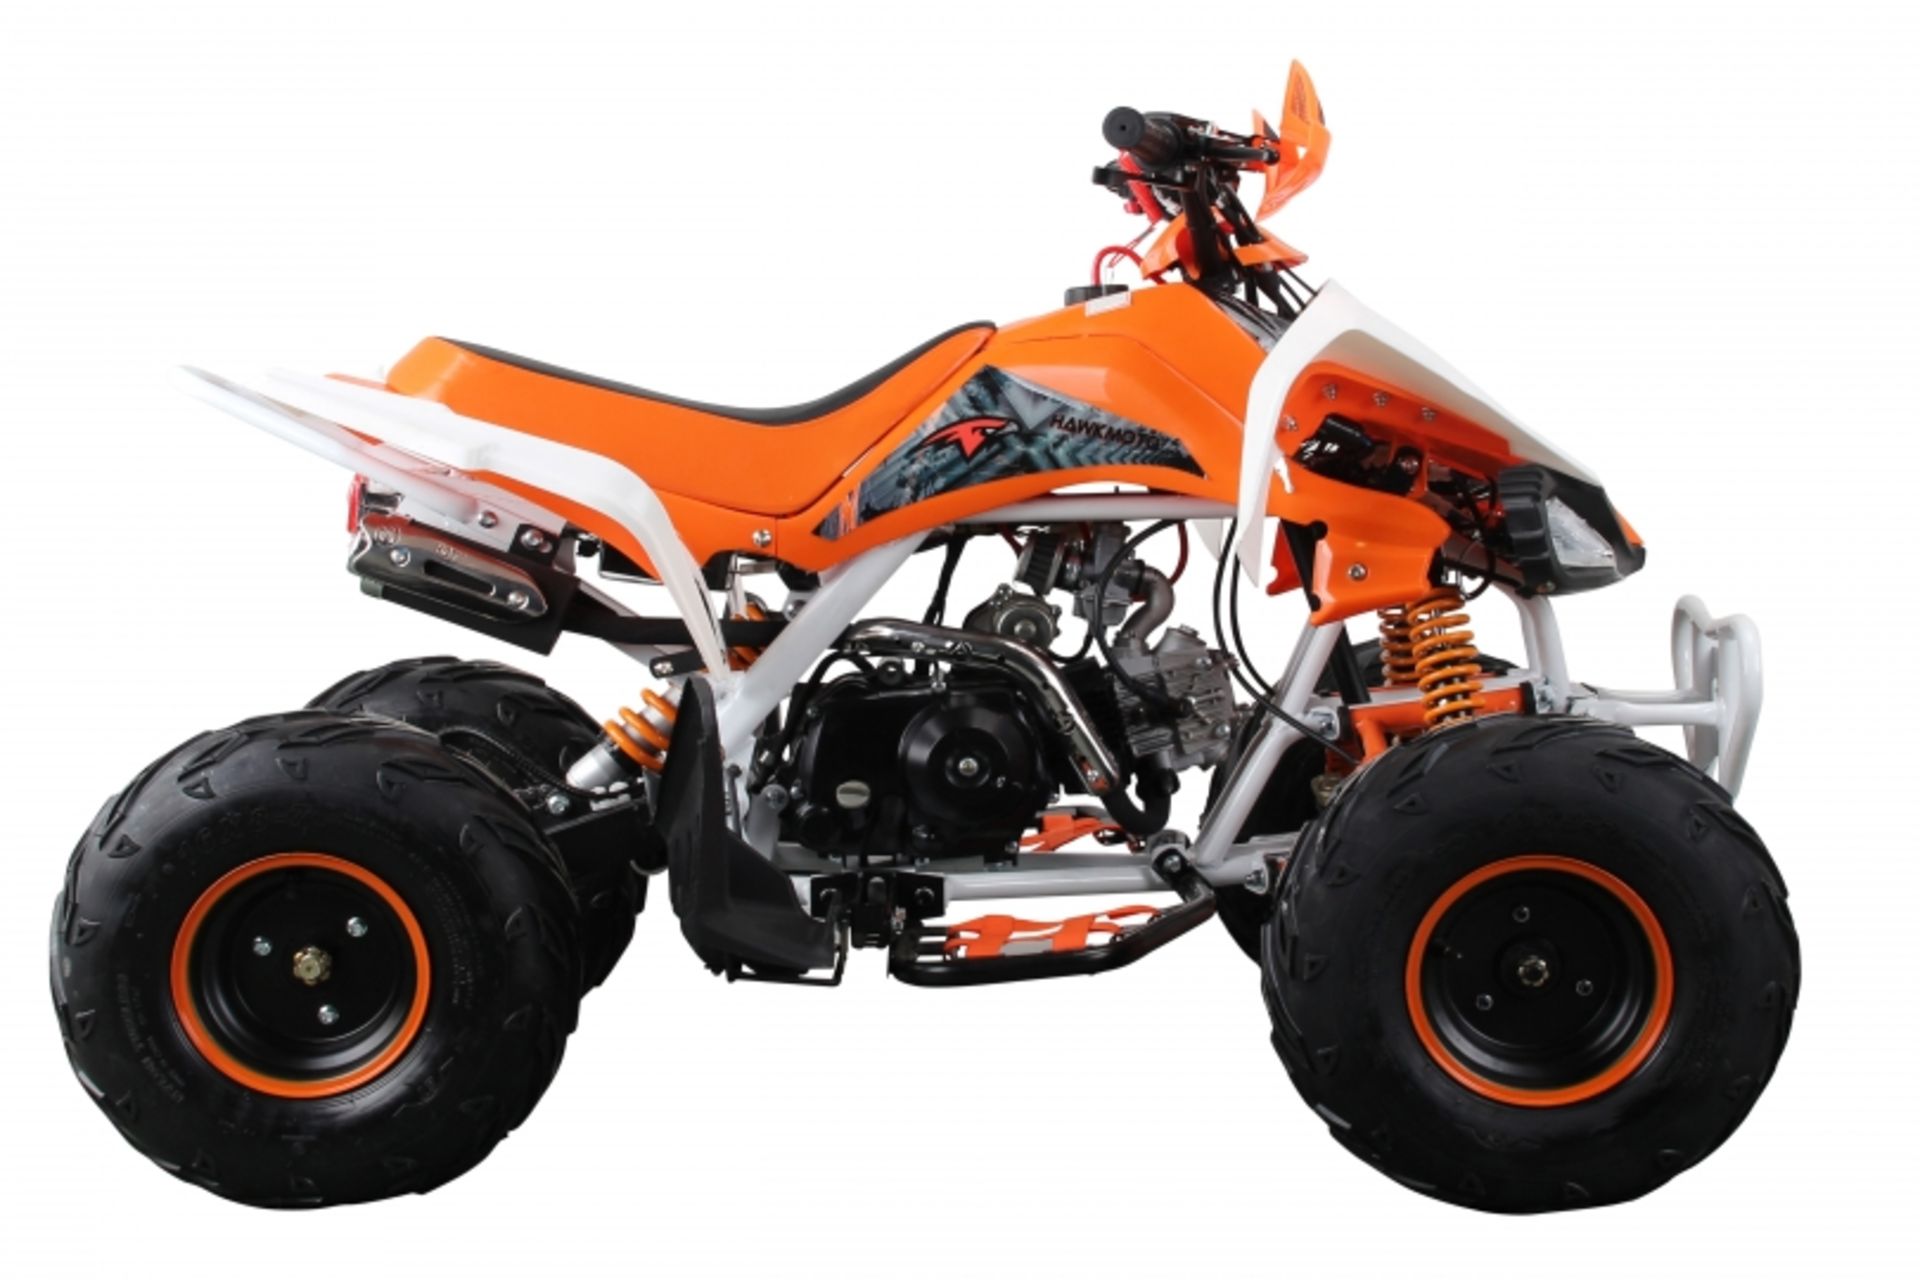 V Brand New 125cc Interceptor SV2 4 Stroke Quad Bike With Reverse Gear - Double Front Suspension/ - Image 5 of 7